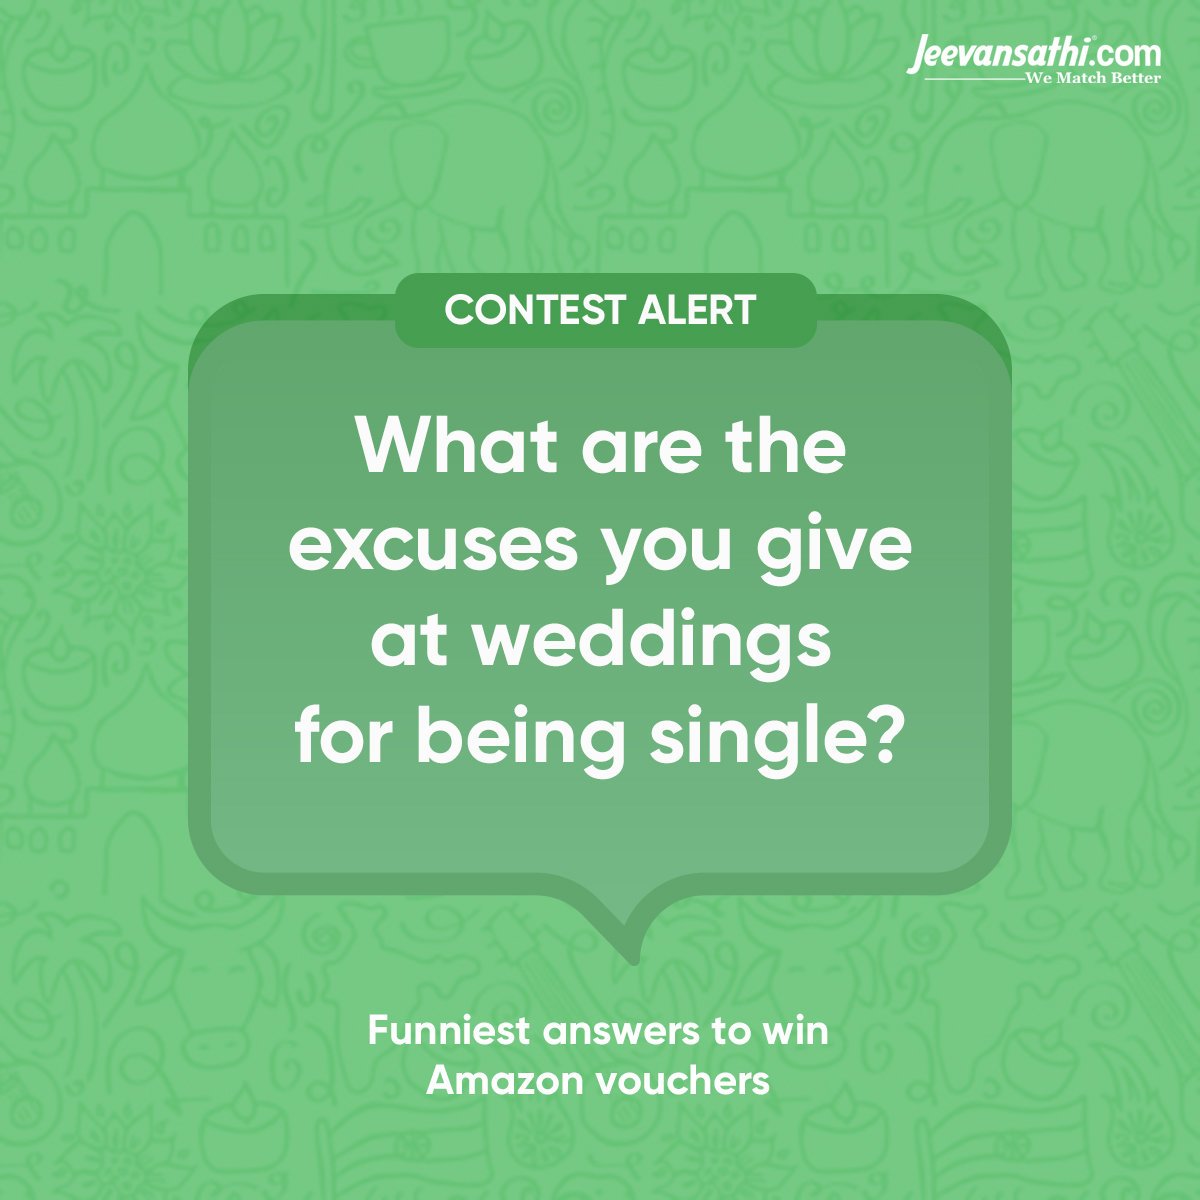 #ContestAlert | Wedding season is upon us and this one’s for all the singles! 1) Share your funniest excuses in a tweet 2) Follow @Jeevansathi_com on Twitter 3) Tag two friends who should participate in this contest 4) RT for some brownie points! Contest ends 4th Nov ‘22.